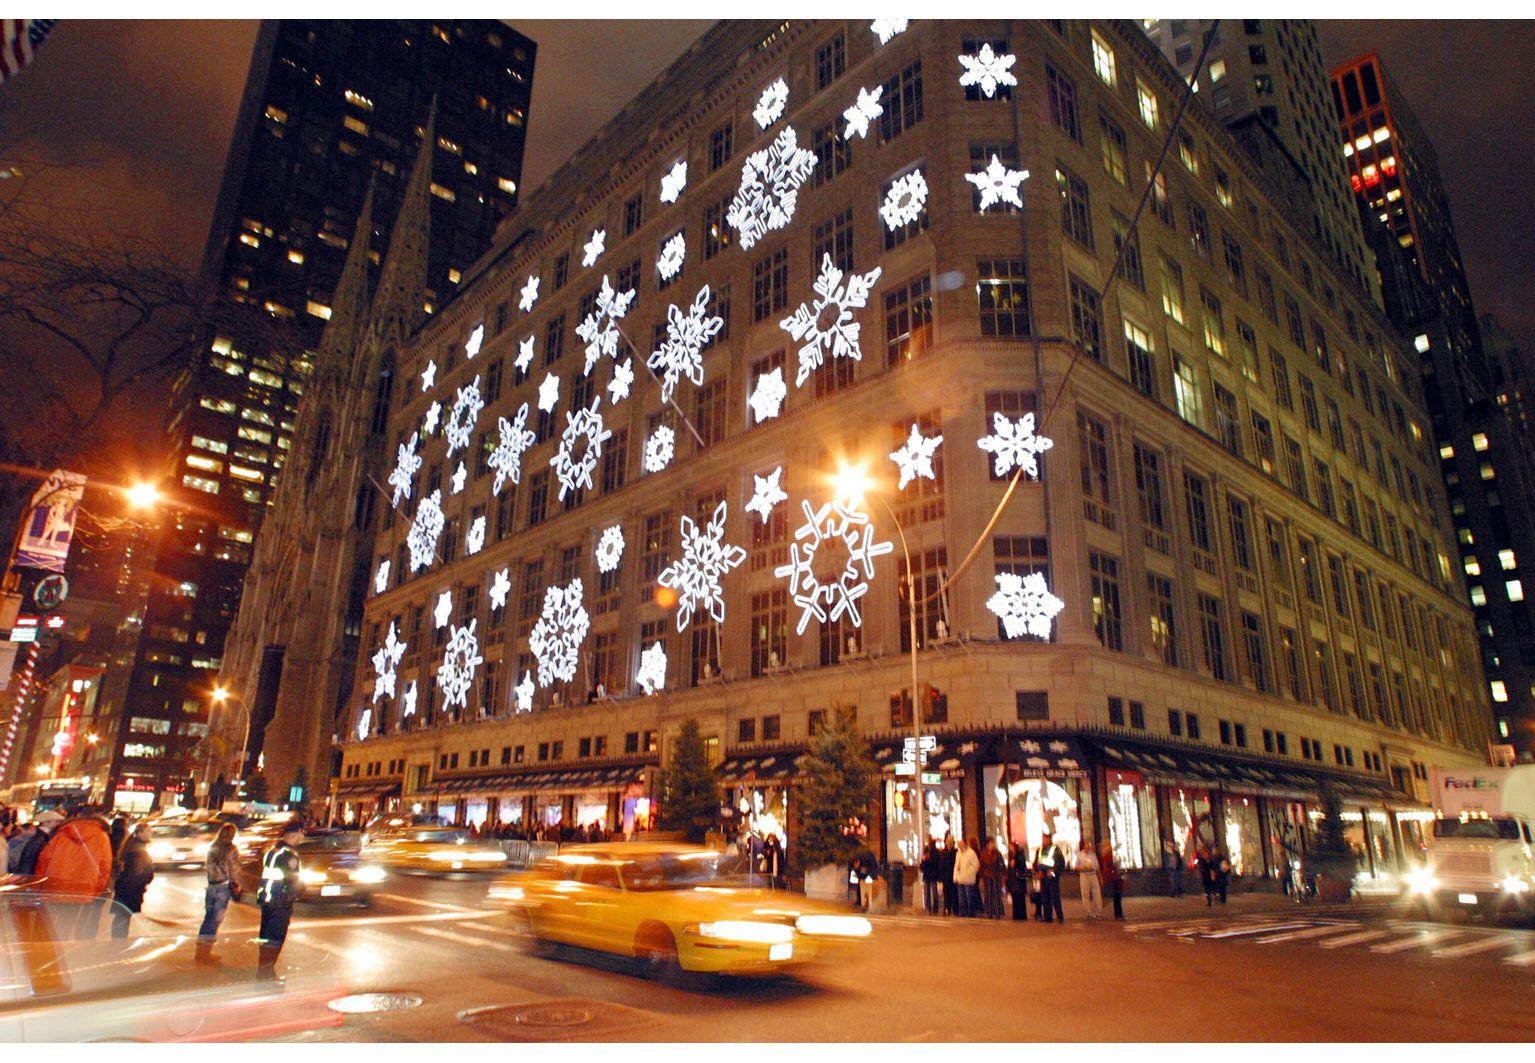 Saks Fifth Avenue! This heritage department store put 5th